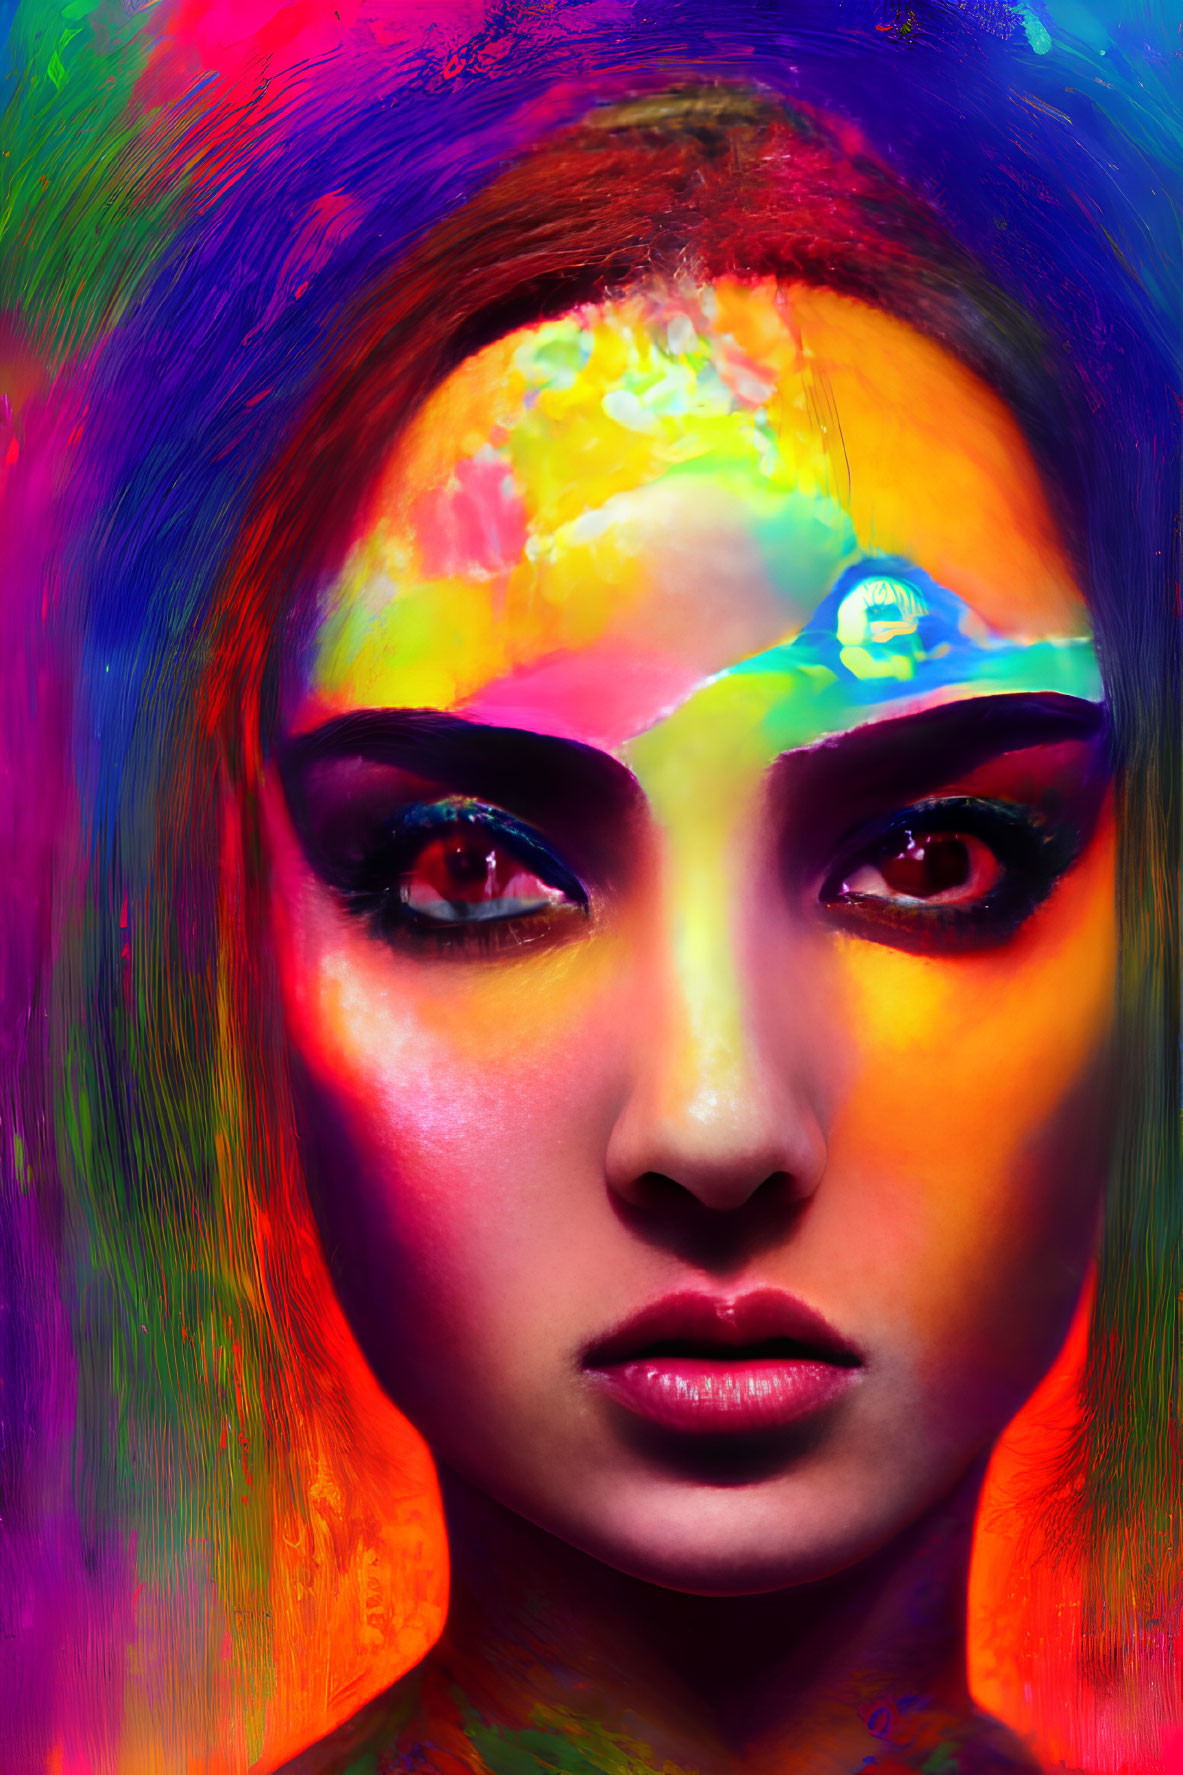 Colorful portrait of a woman with vibrant face paint and intense gaze